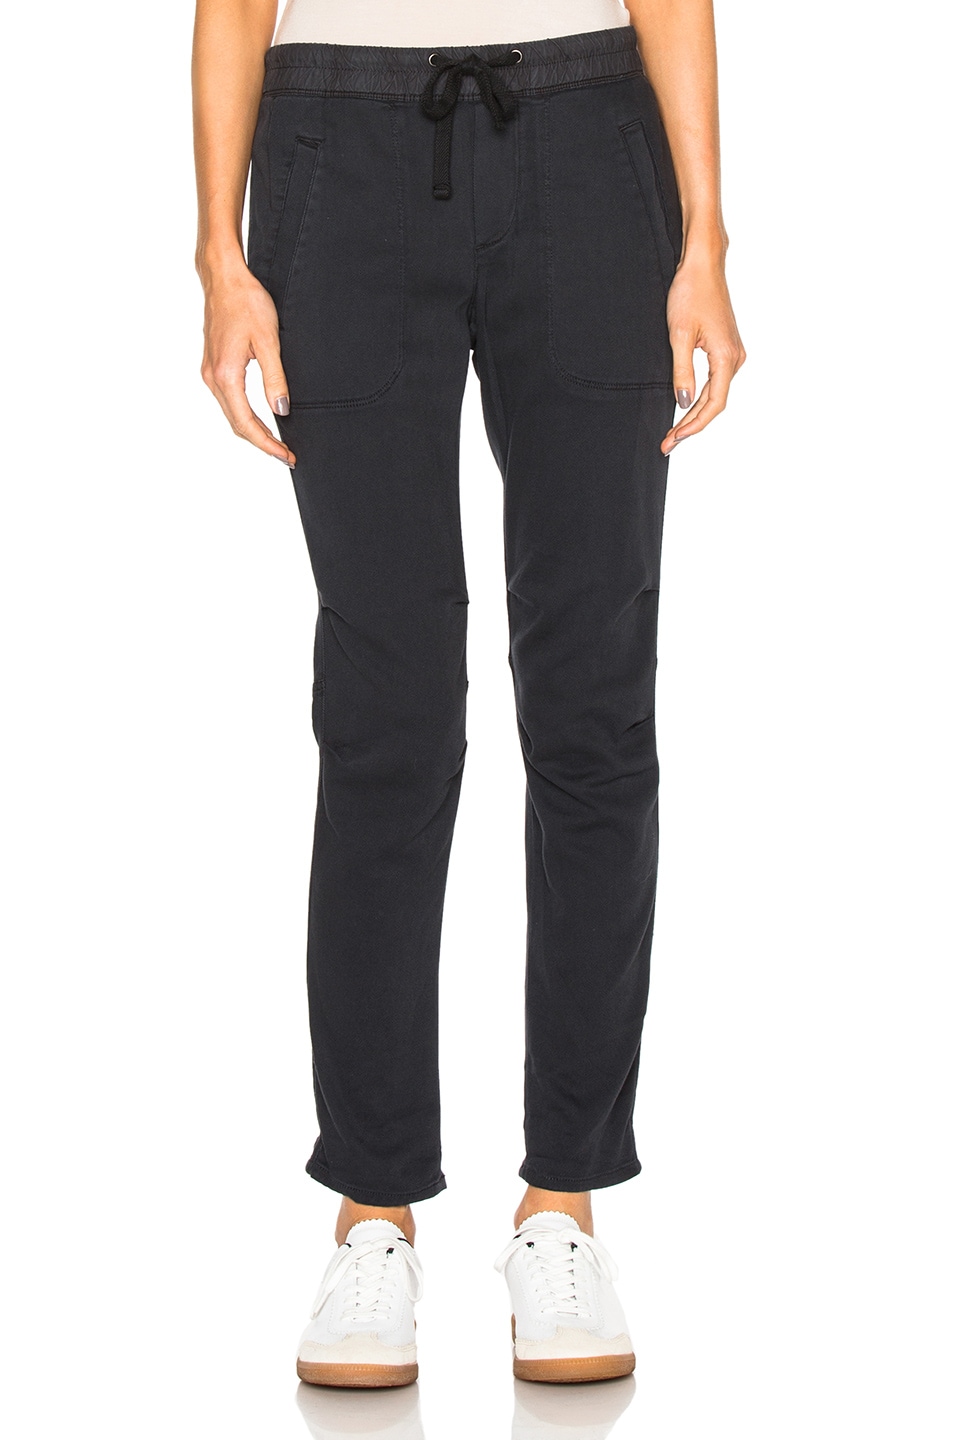 Image 1 of James Perse Super Soft Twill Pants in Carbon